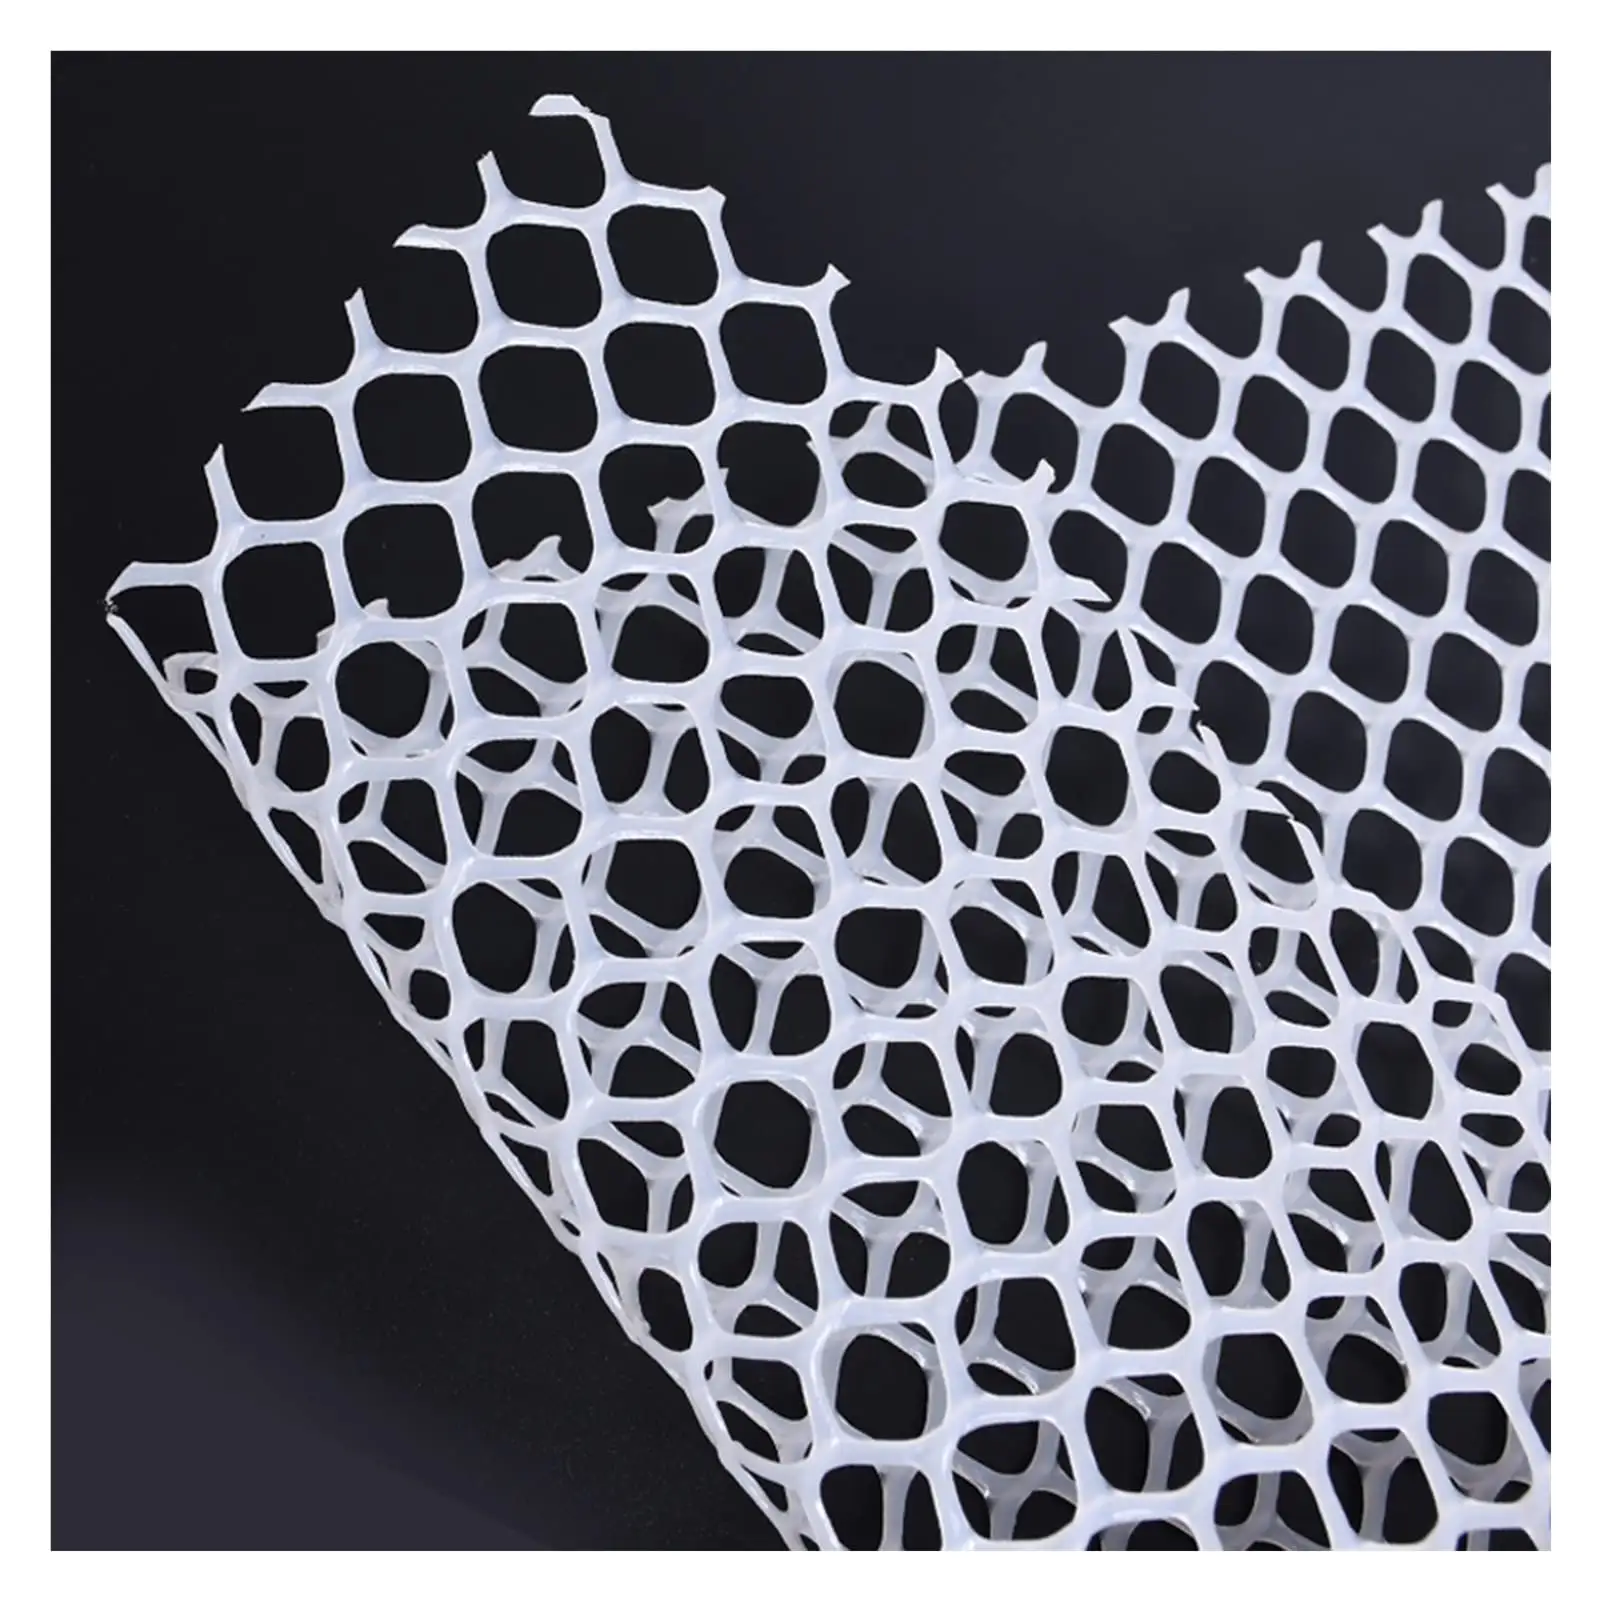 Durable Hexagonal Plastic Mesh Netting in Multiple Colors for Temporary Garden and Yard Protection as Fencing